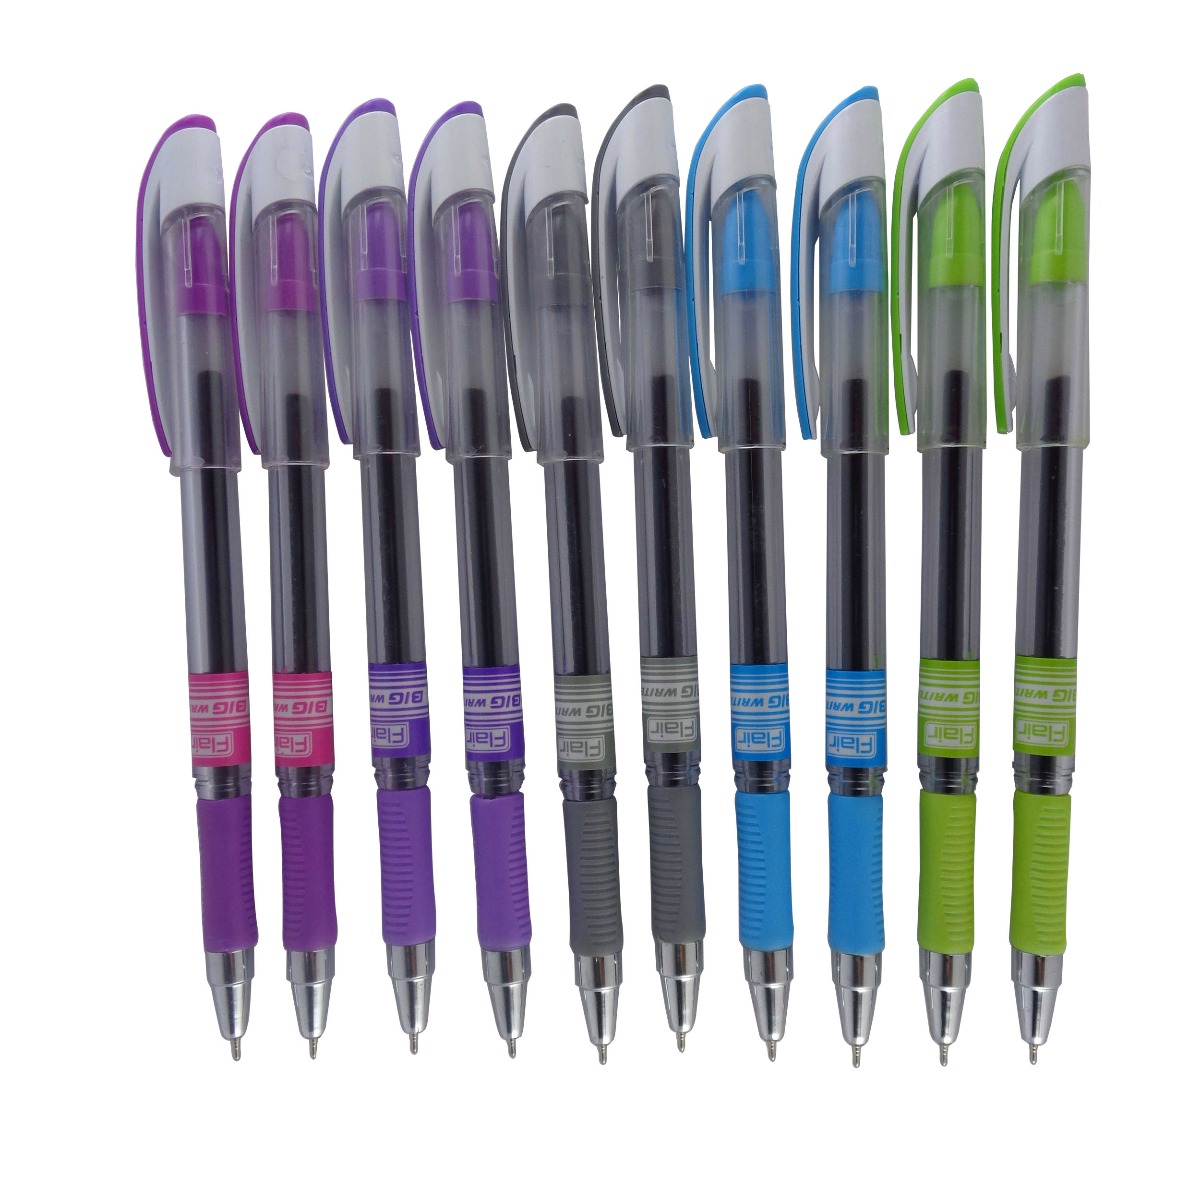 Plastic Flair Pen, For Writing, Packaging Type: Packets